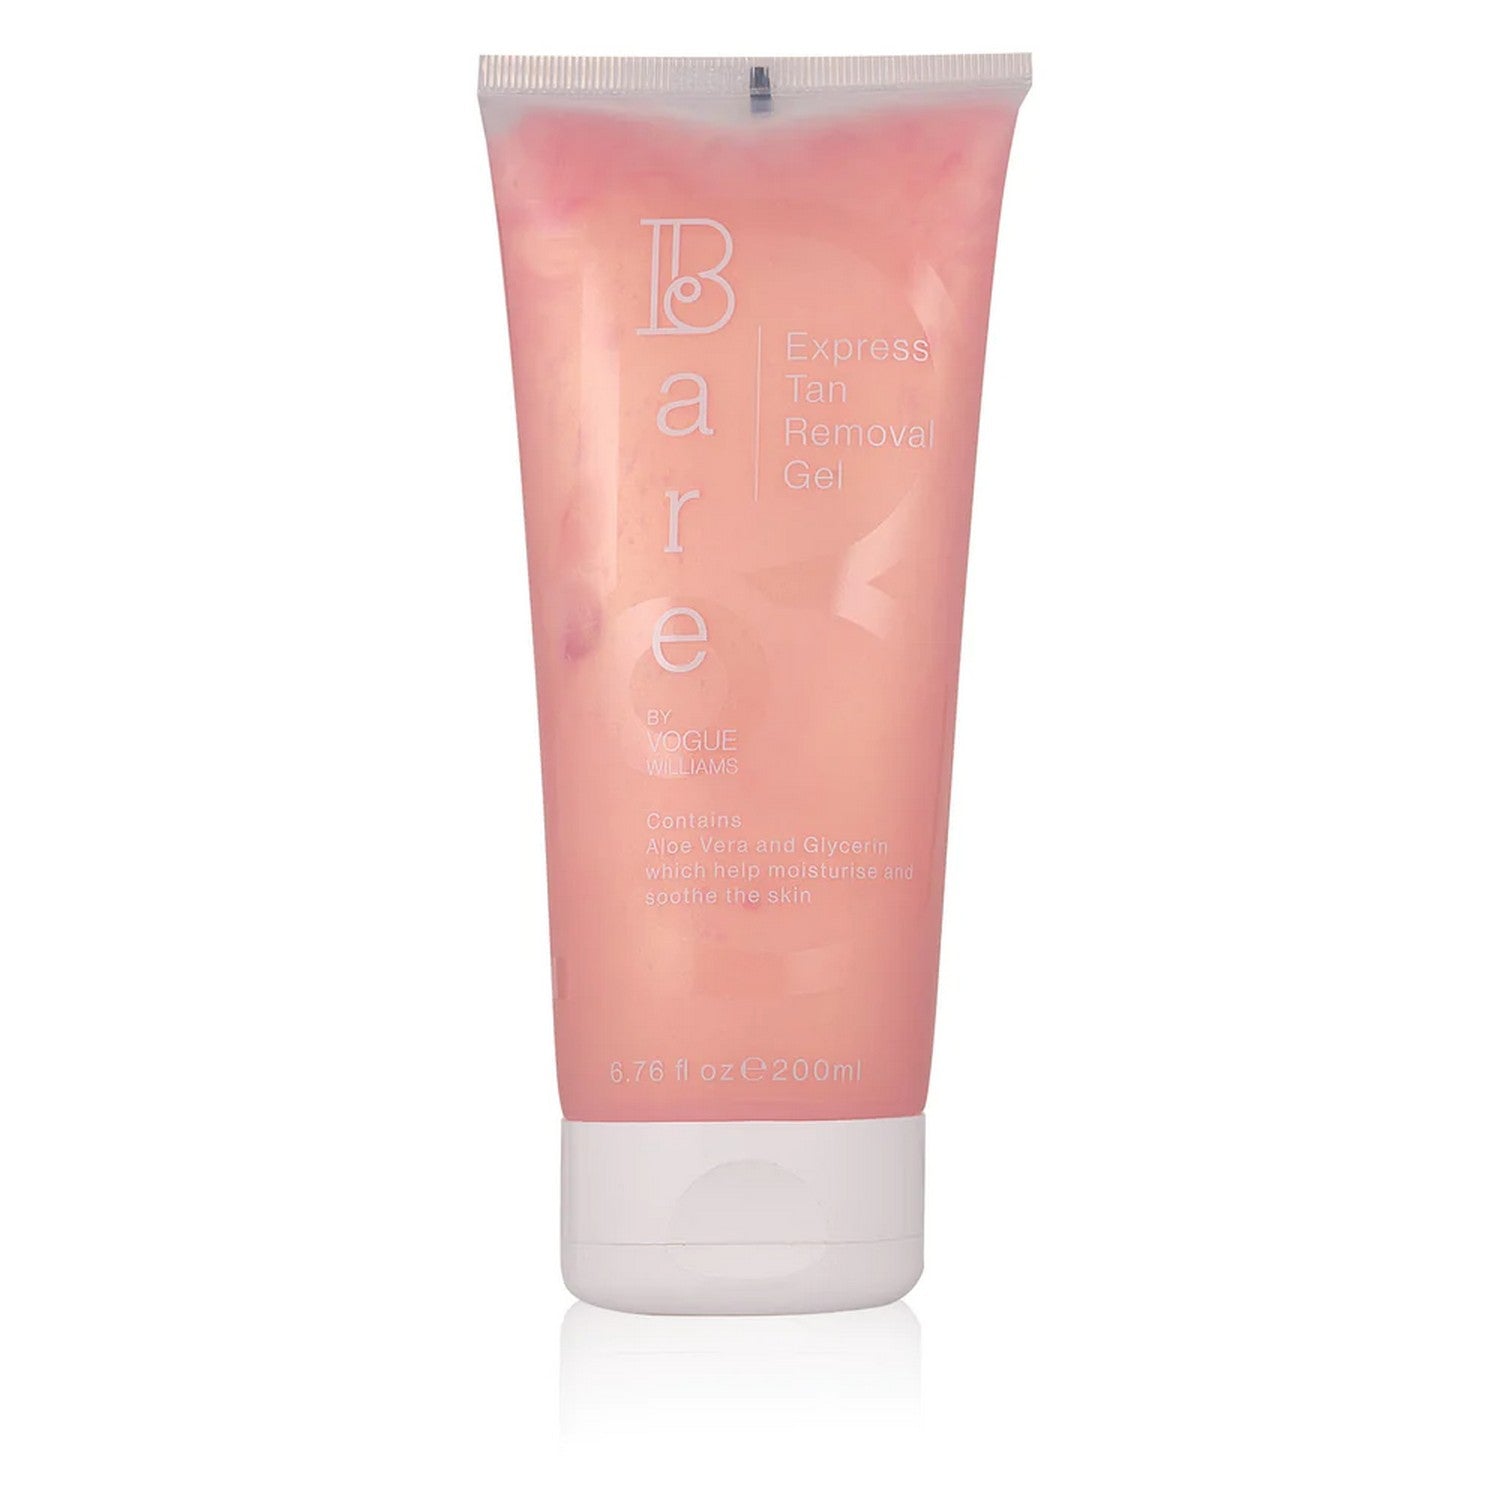 Bare By Vogue Express Tan Removal Gel 150ML